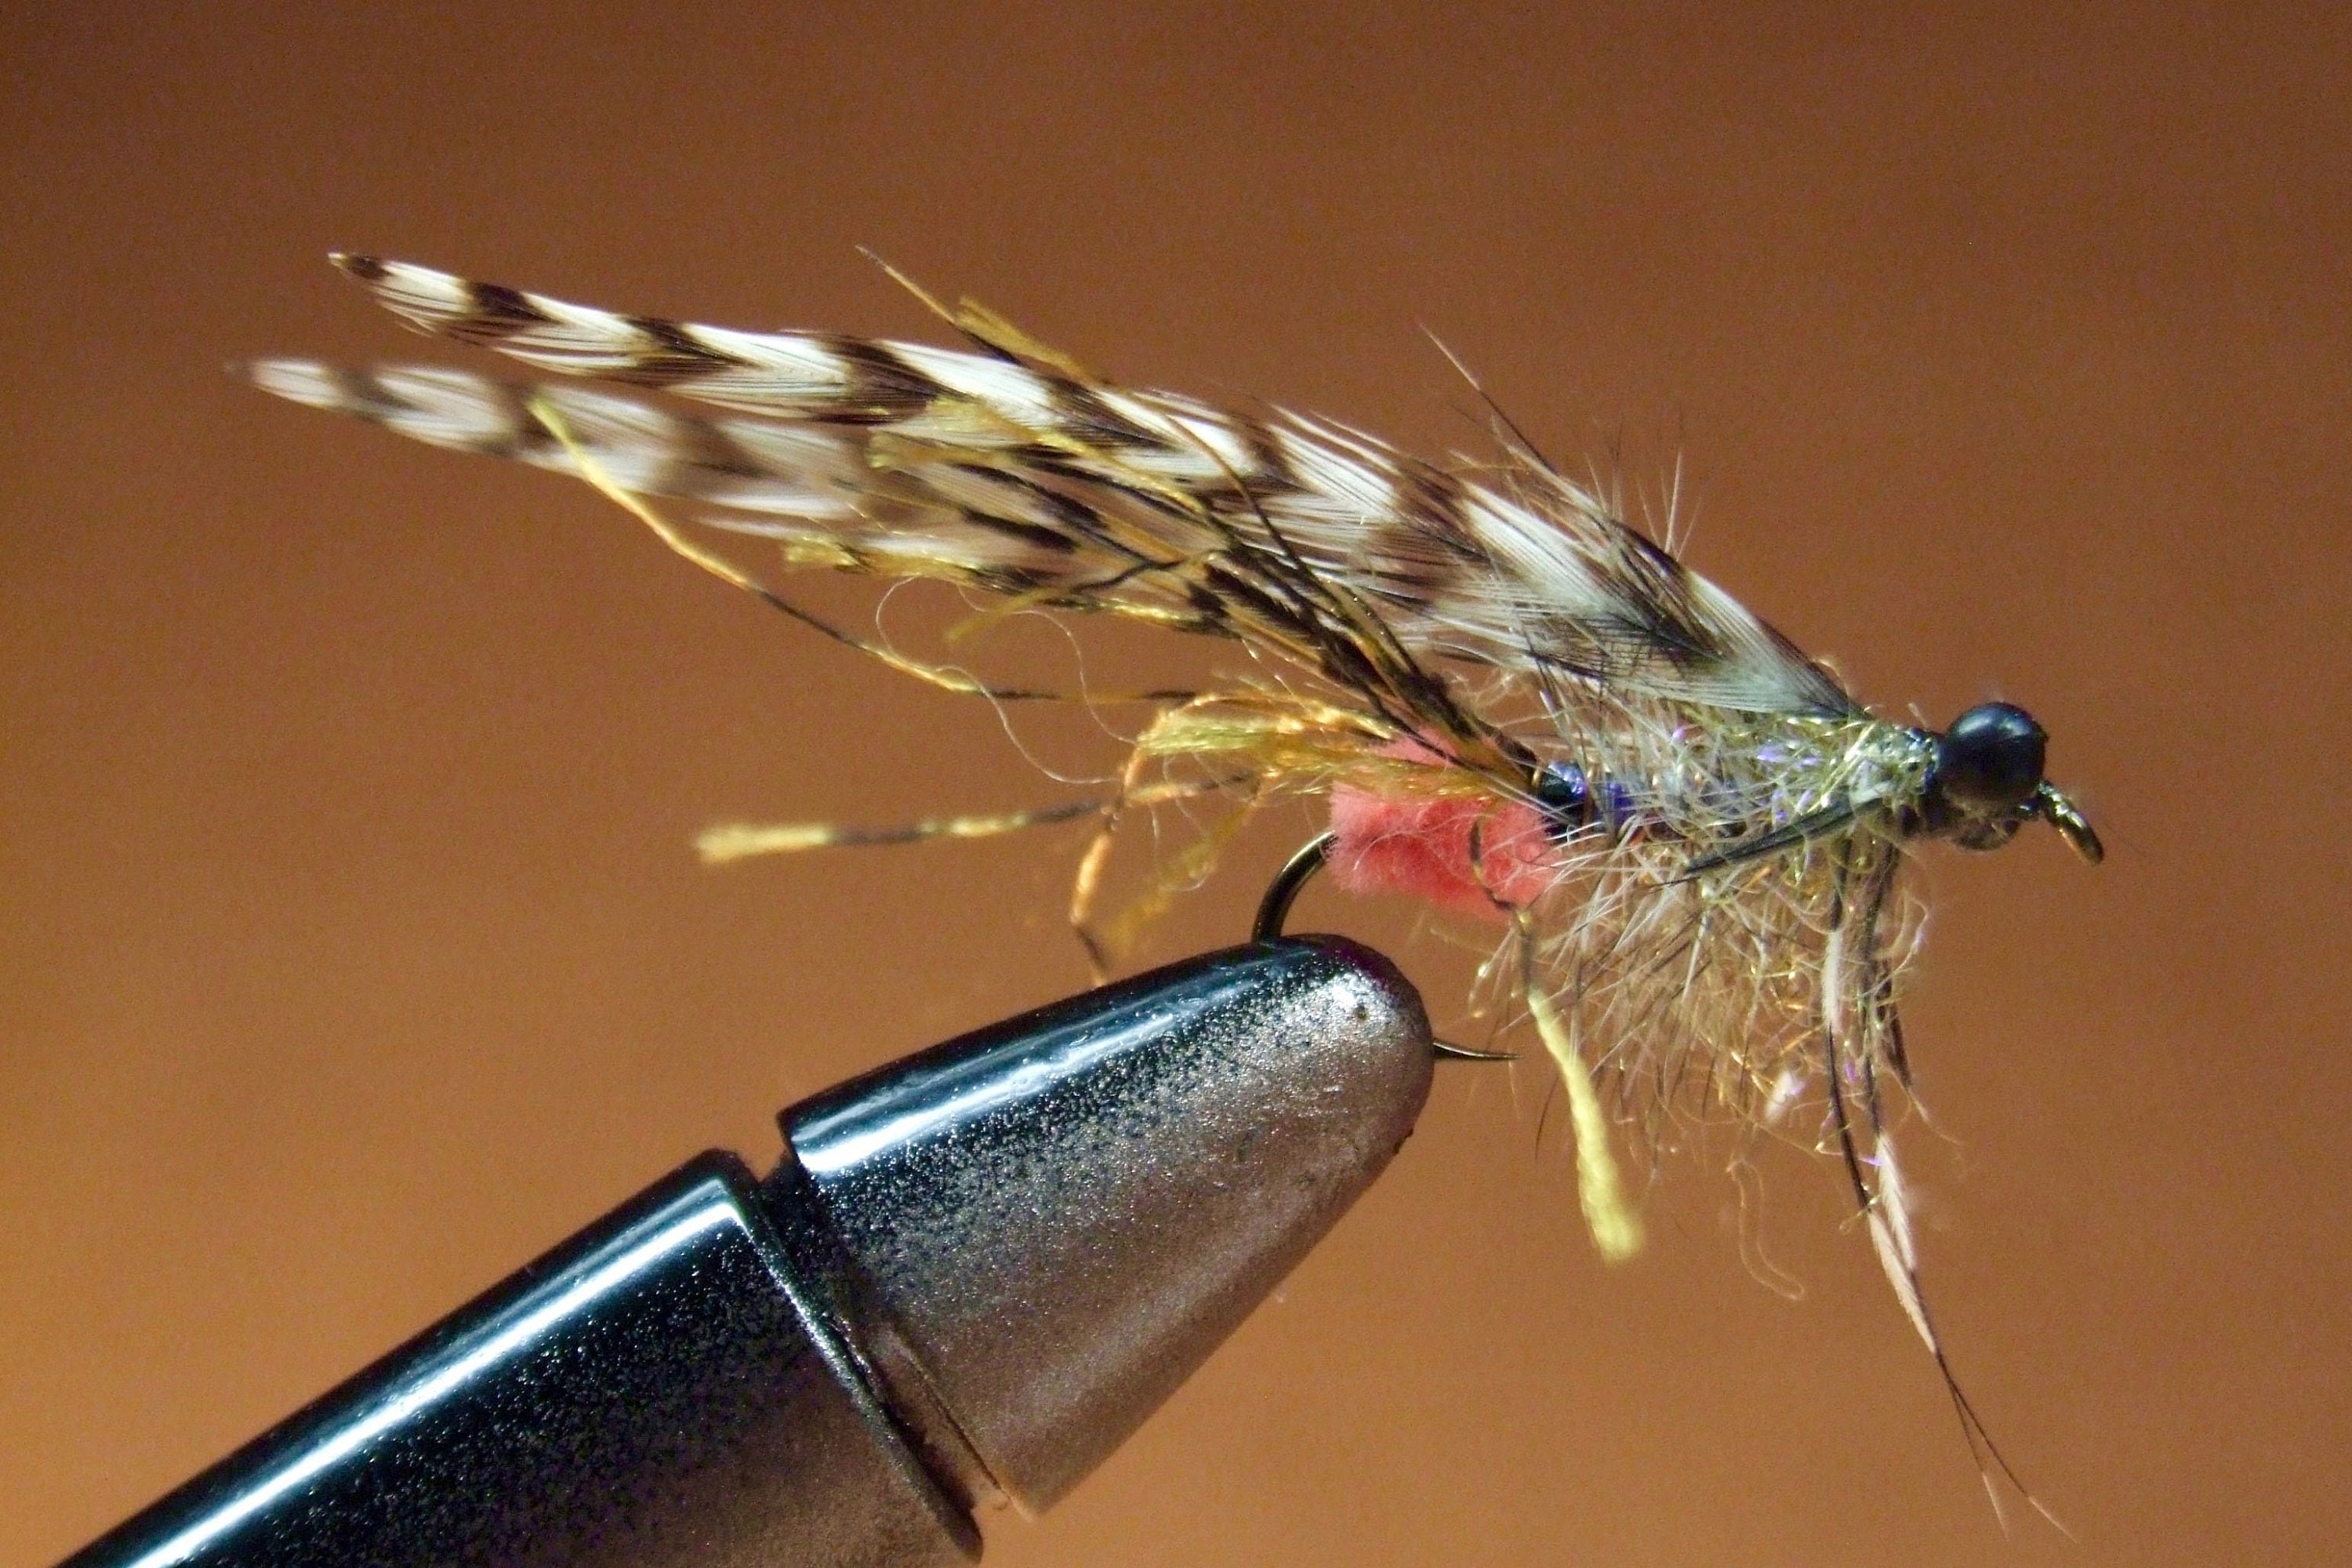 Black Eyed Pink Butt Grizzly Streamer — Size 6 Hand-Tied Trout Flies